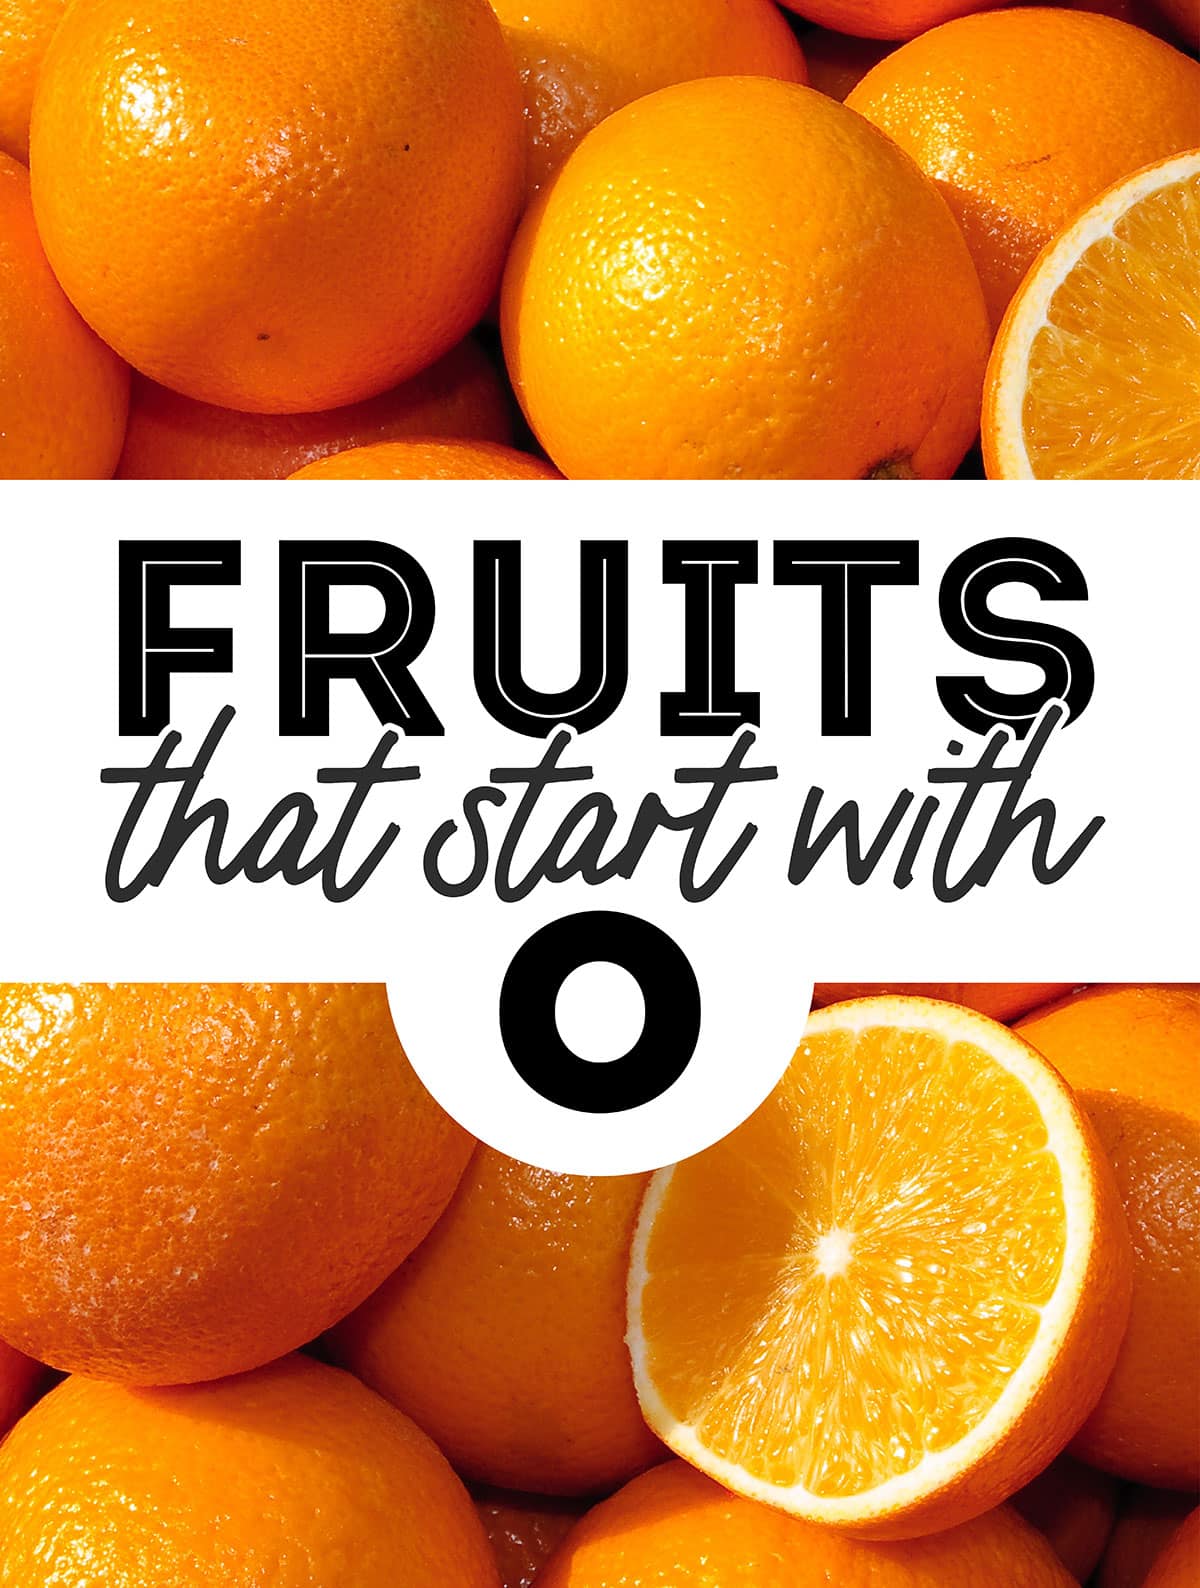 Collage that says "fruits that start with O"